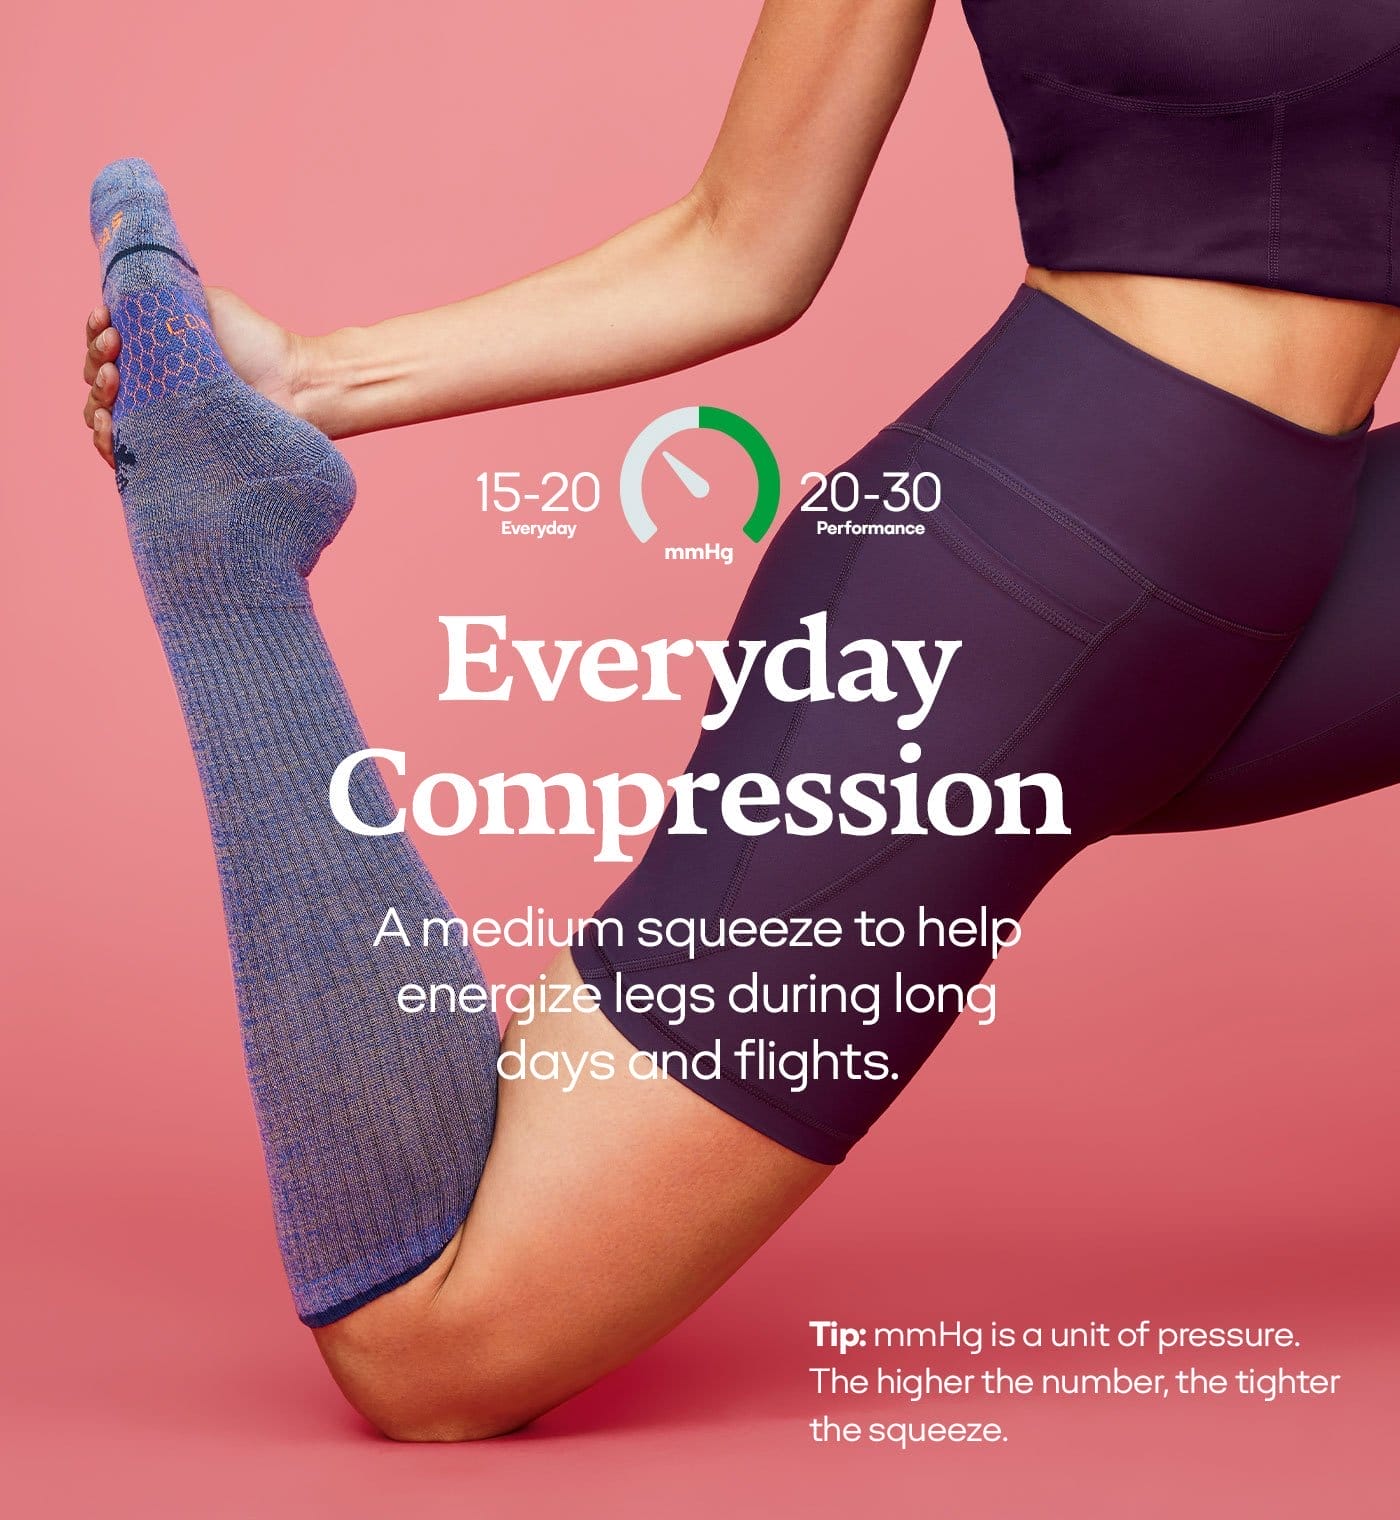 Everyday Compression | A medium squeeze to help energize legs during long days and flights.